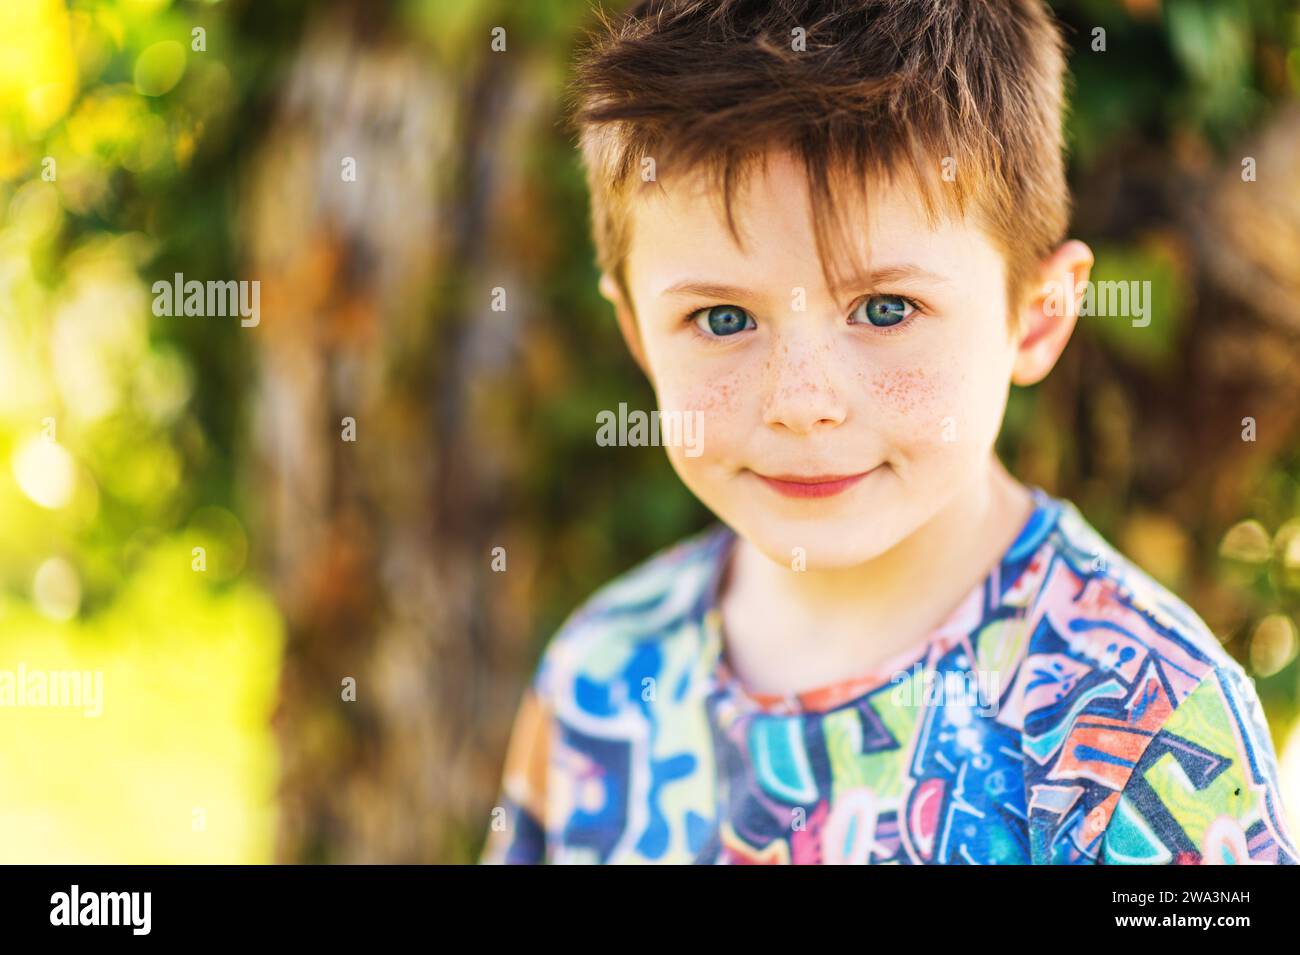 Outdoor close up portrait of adorable 5-6 year old red-haired boy with freckles on his face Stock Photo